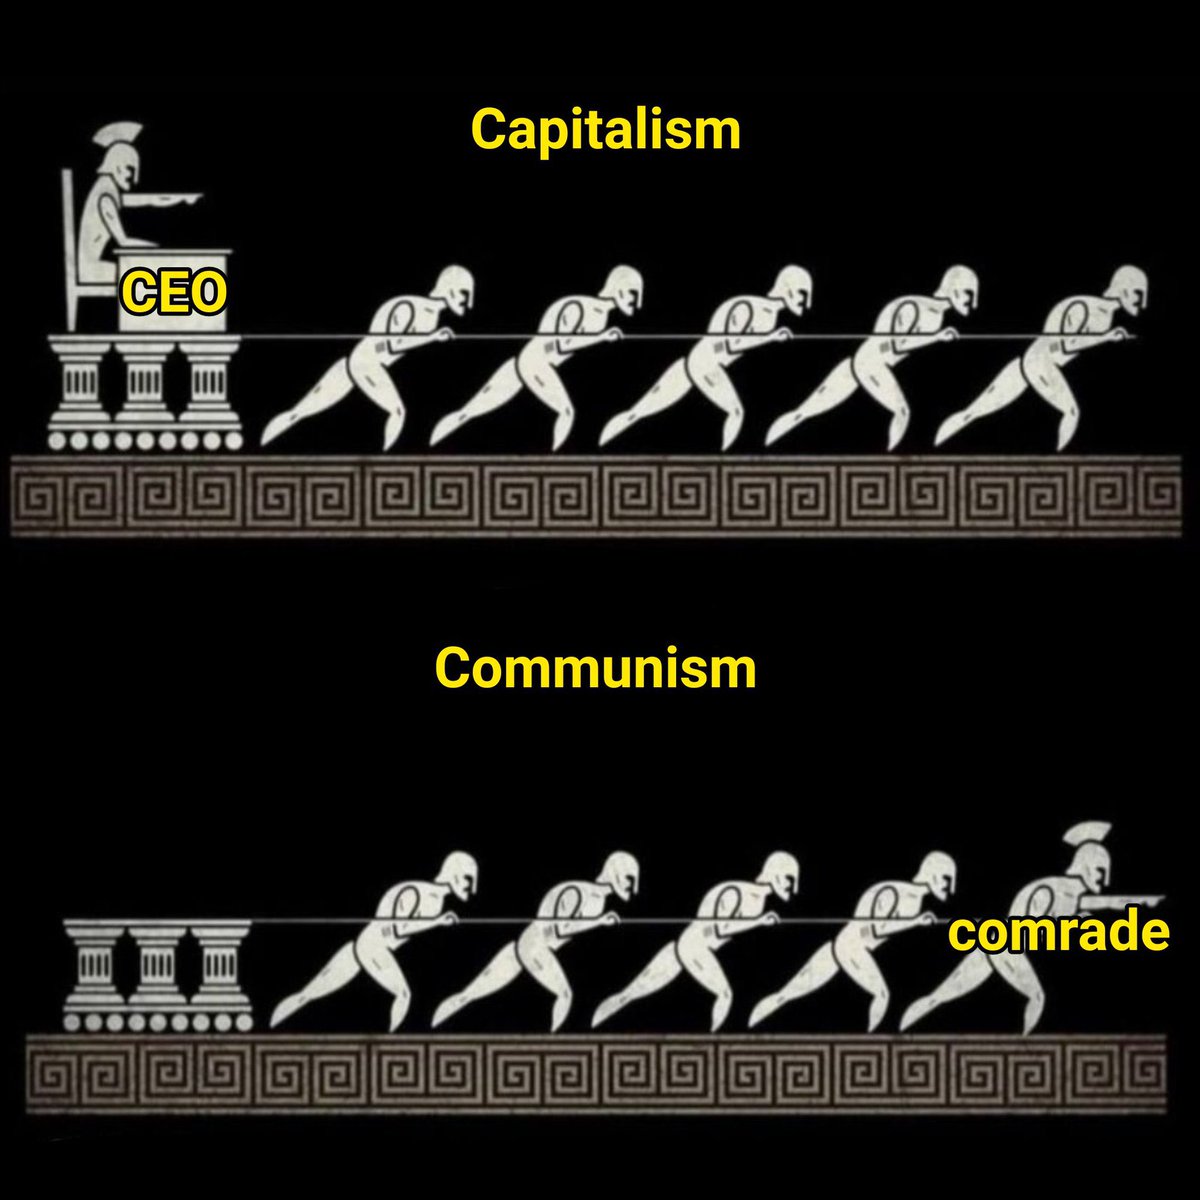 Bye-bye Capitalism and watch Socialism, Communism and then finally Anarchy settle in as it was intended.